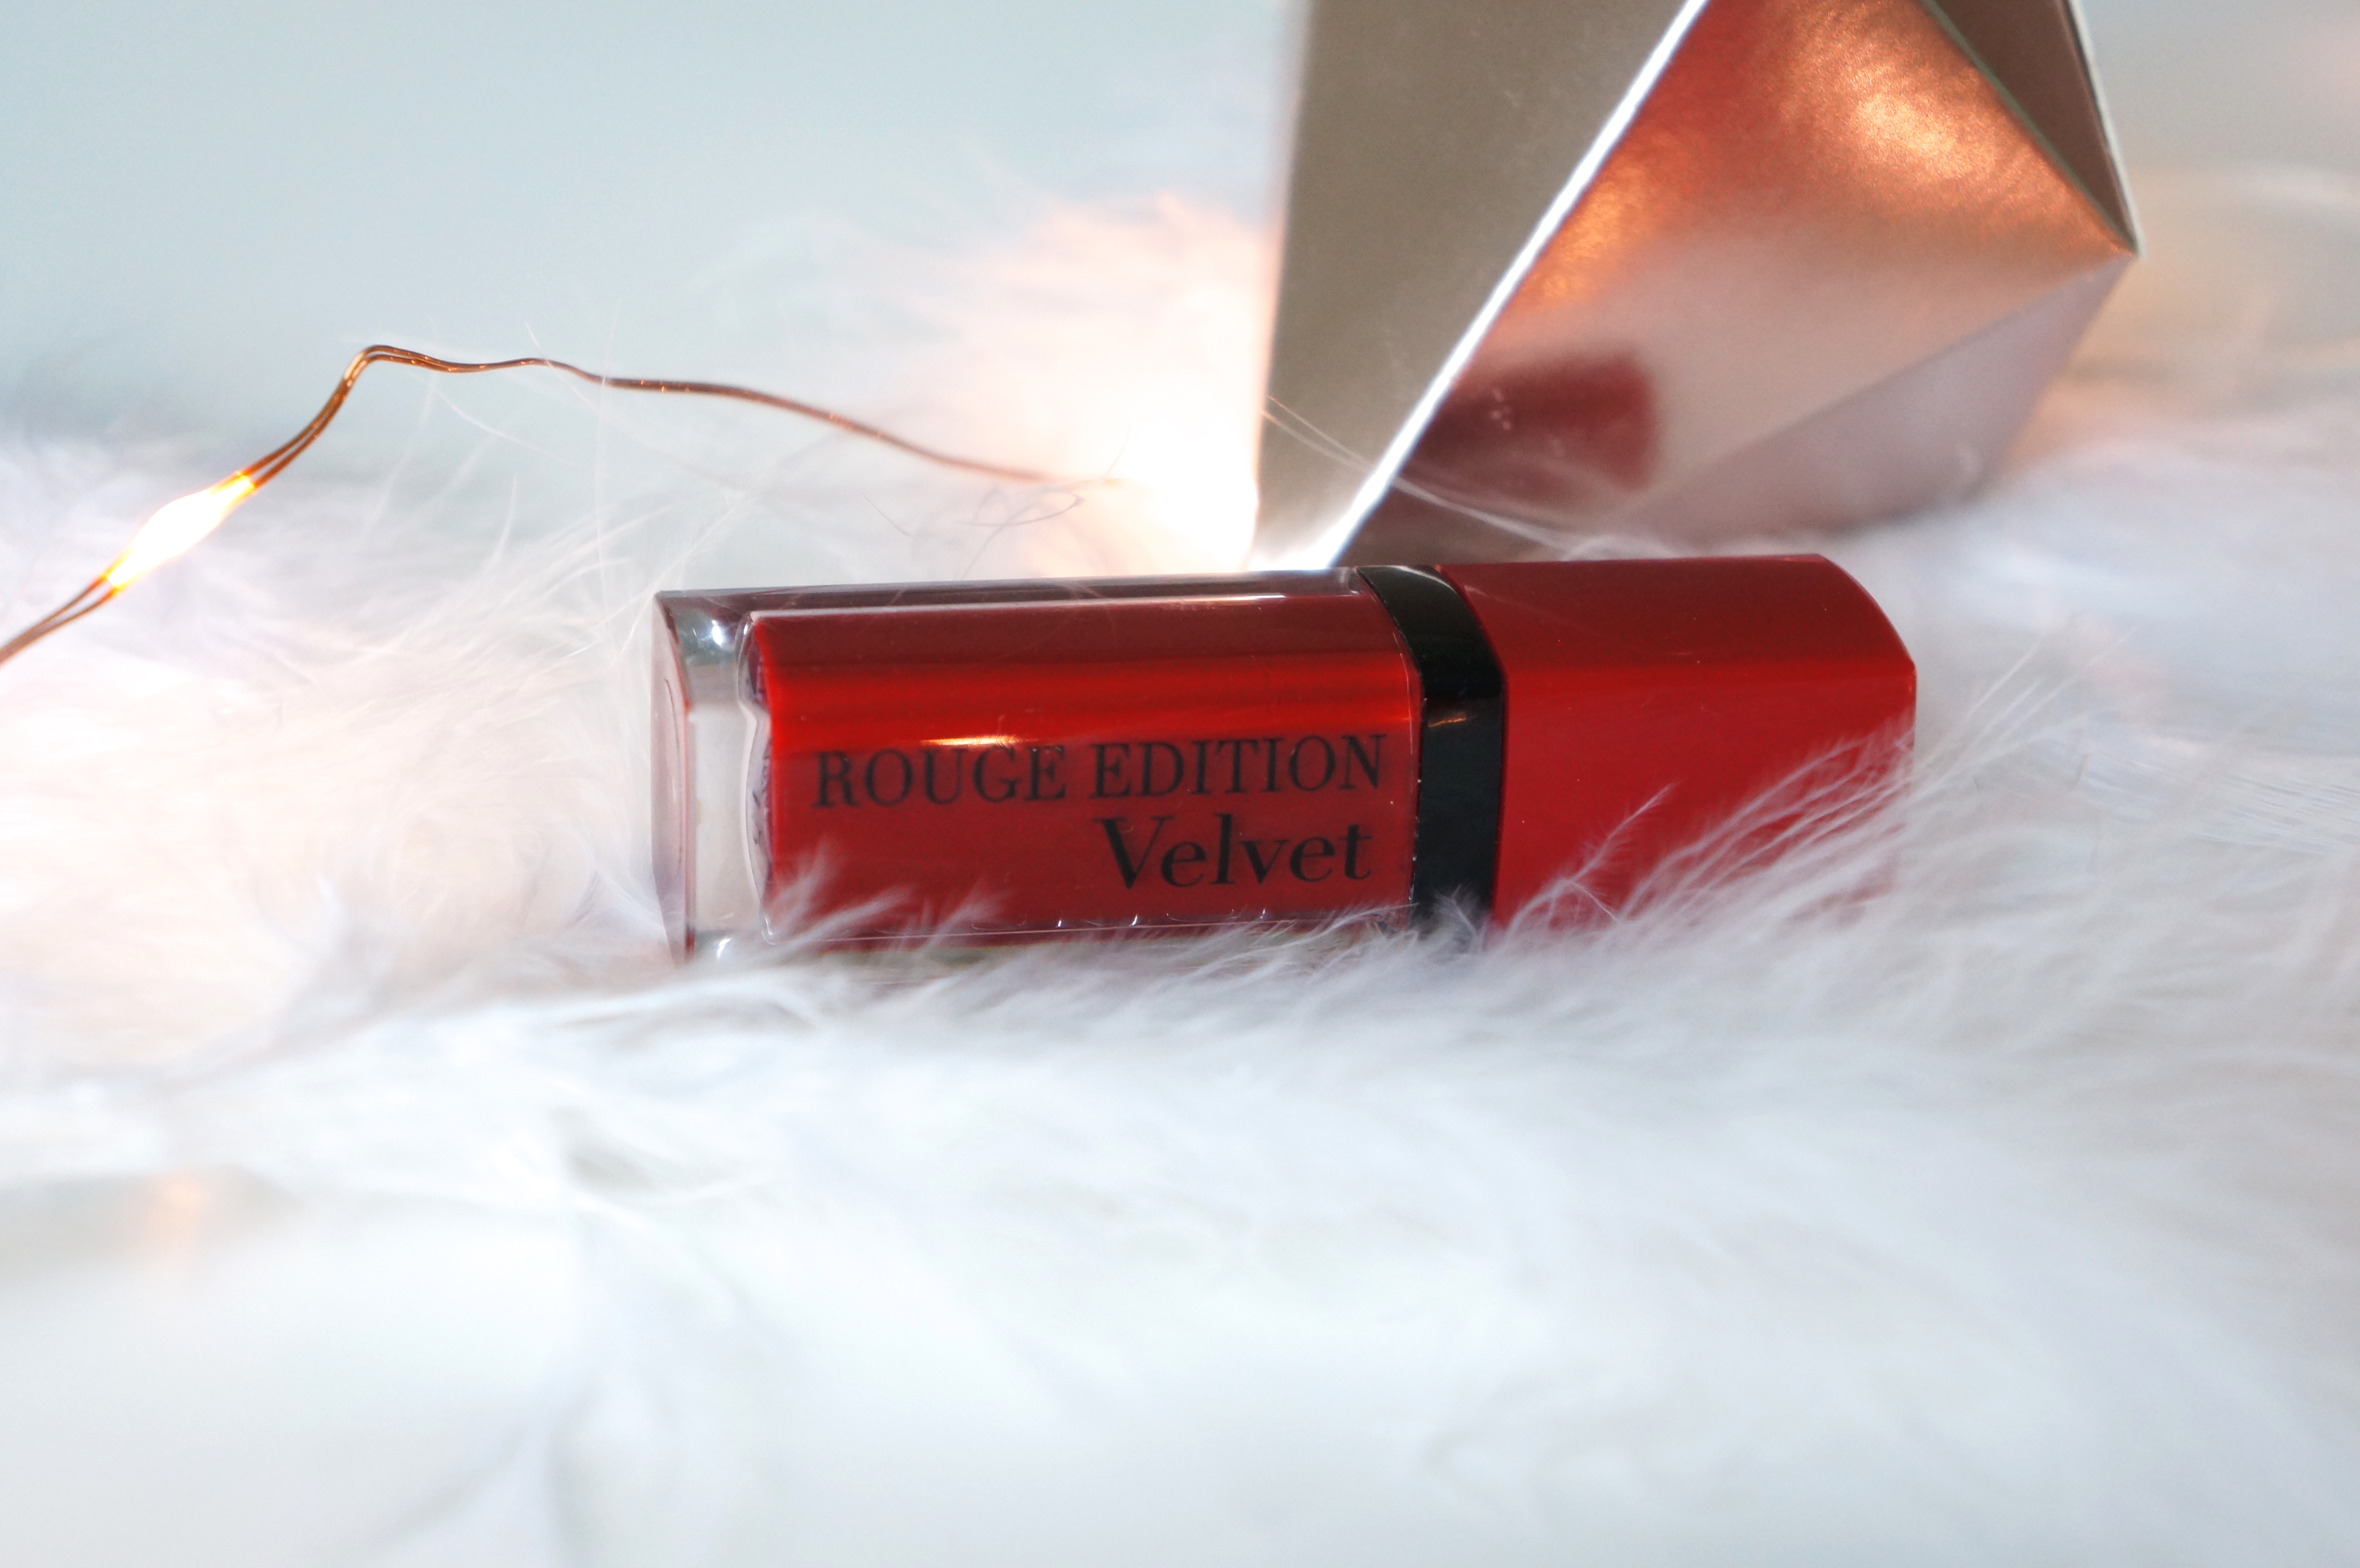 Rouge Edition Velvet "Red-Volution" 15 by Bourjois/ Pic by kiwikoo.